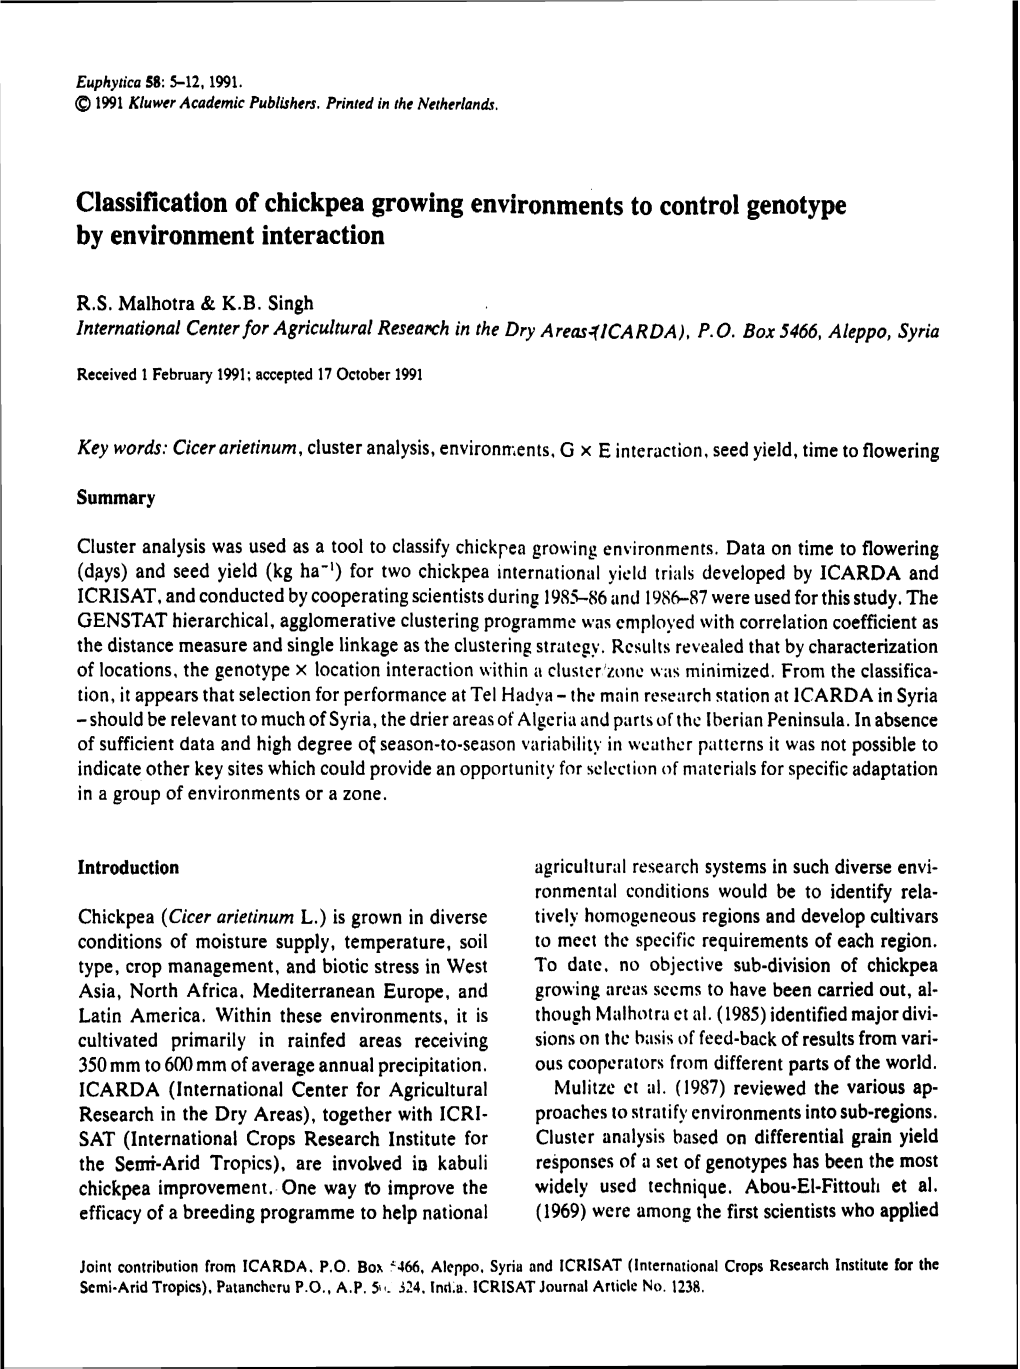 Classification of Chickpea Growing Environments to Control Genotype by Environment Interaction